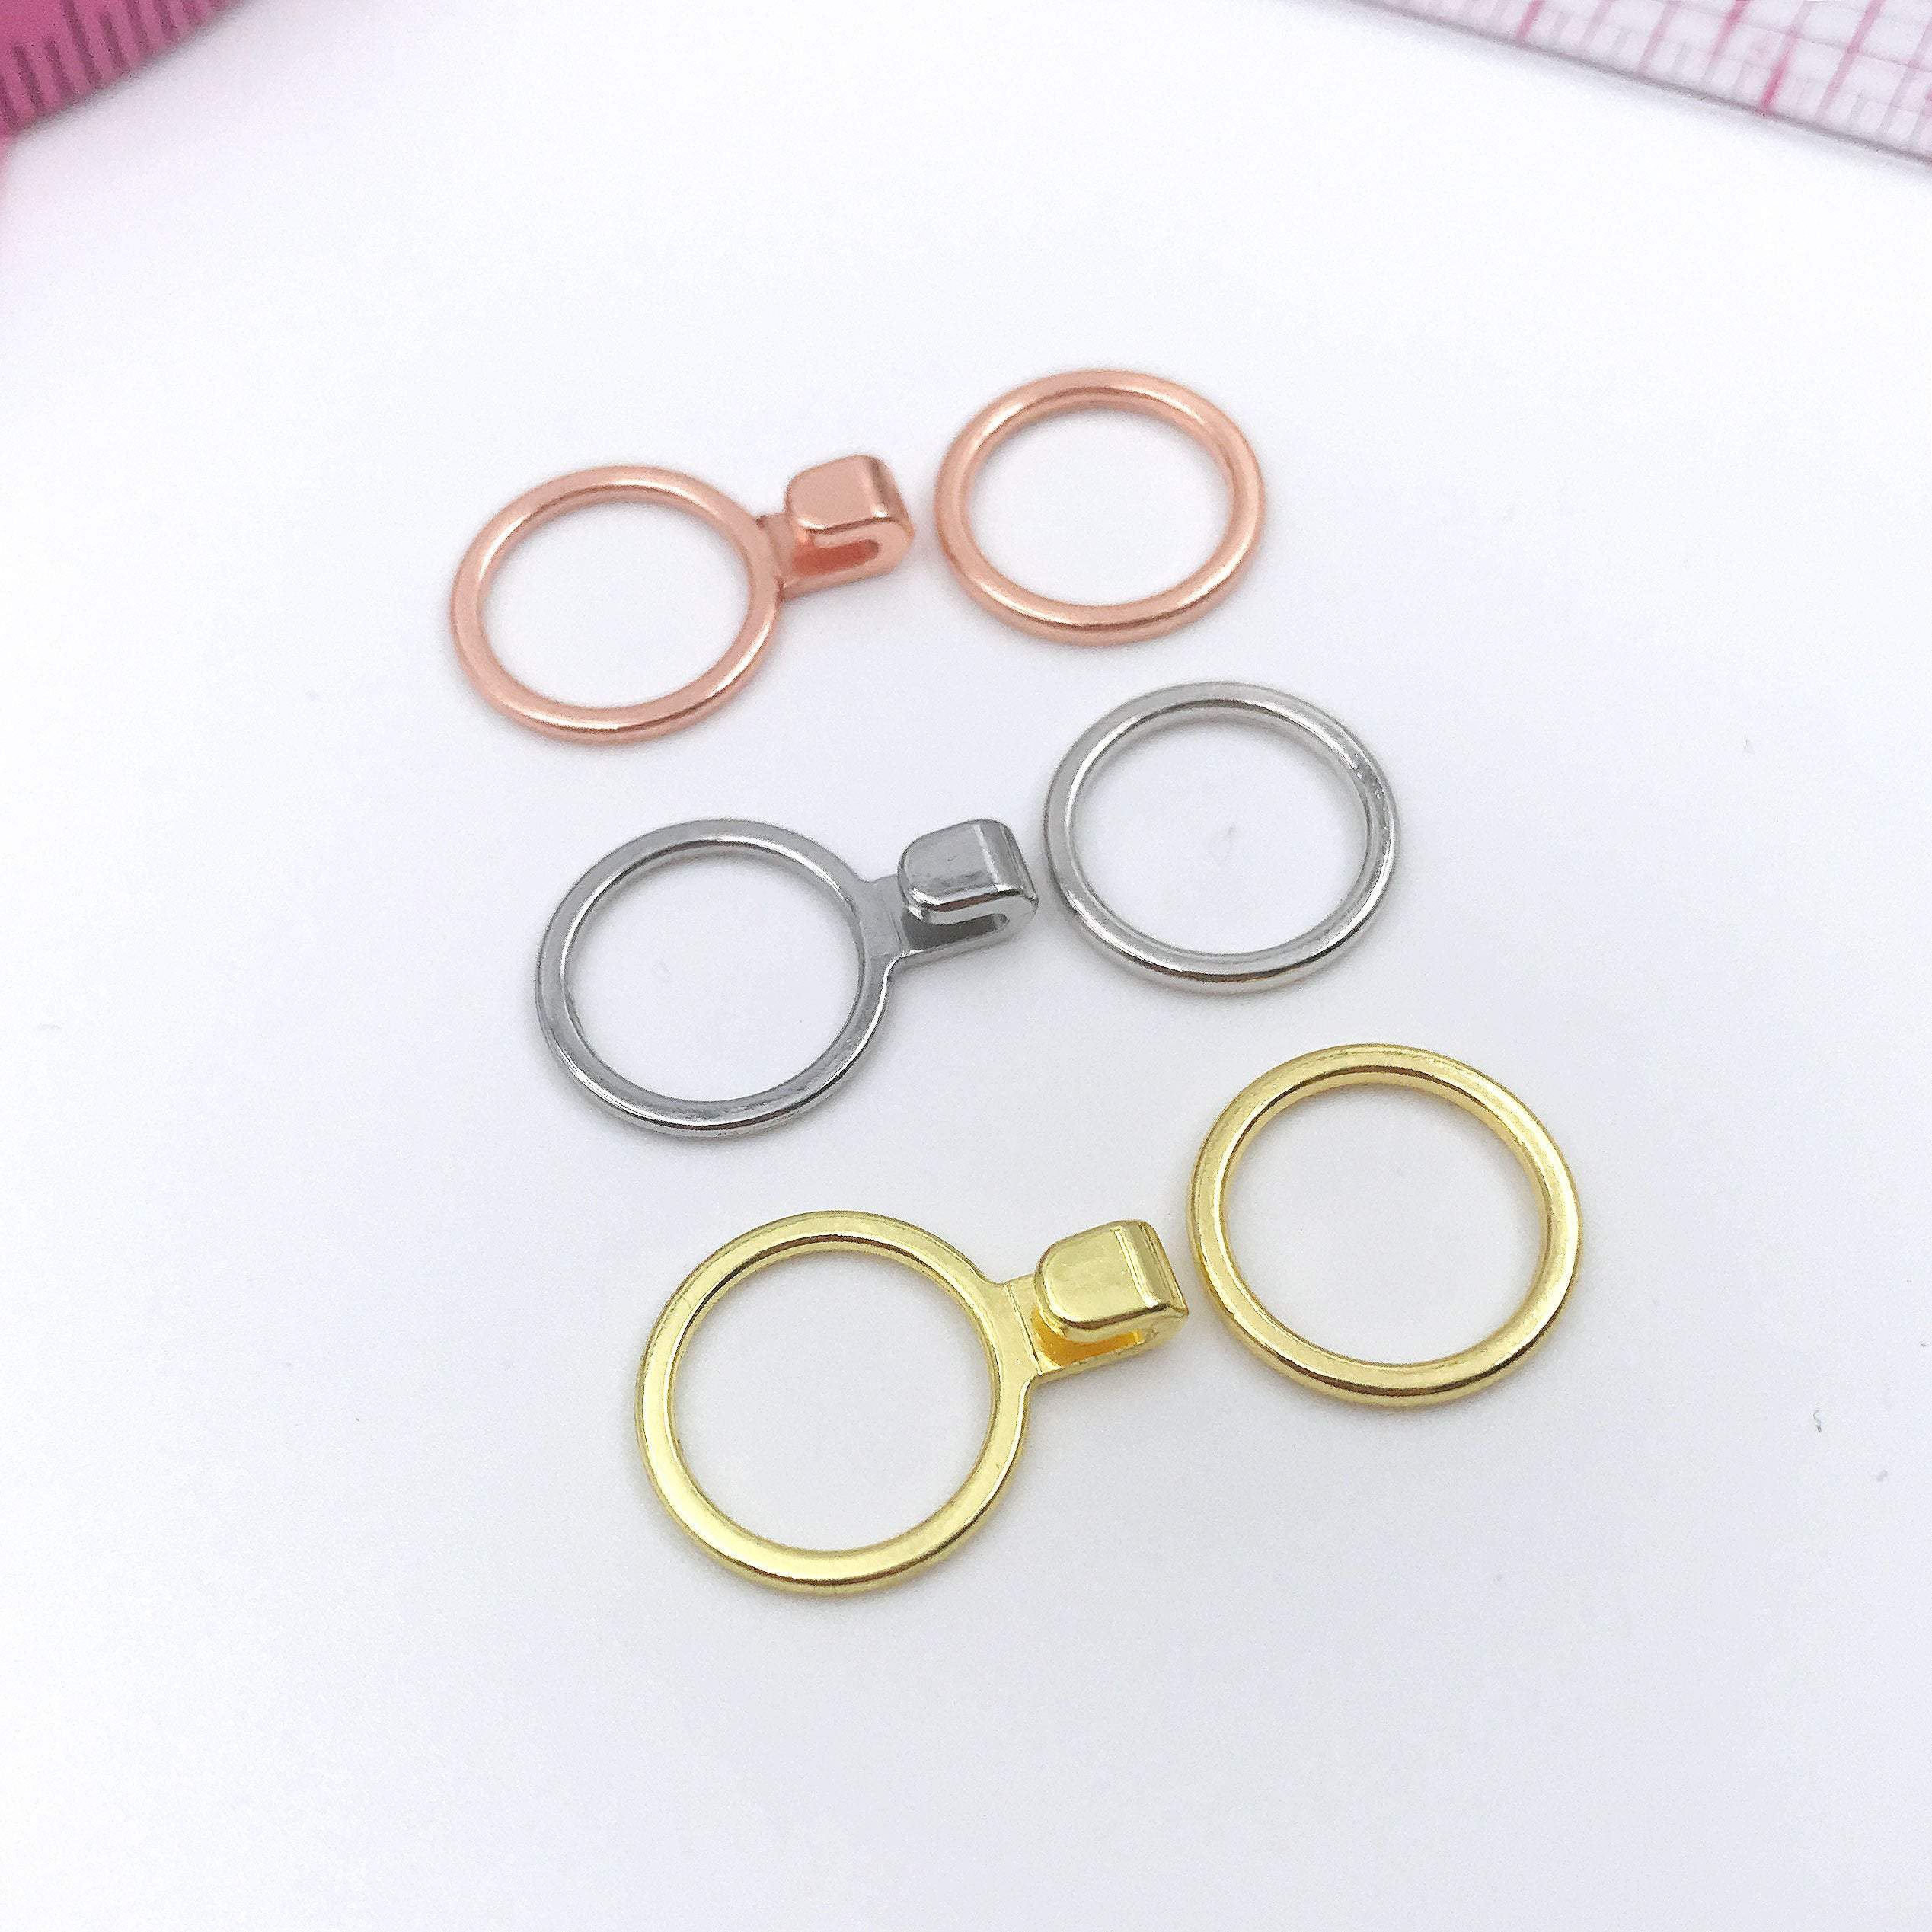 1/2" (12mm) or 3/8" (10mm) J-Hook with ring Set, Converts Bra into a Racer Back - Stitch Love Studio